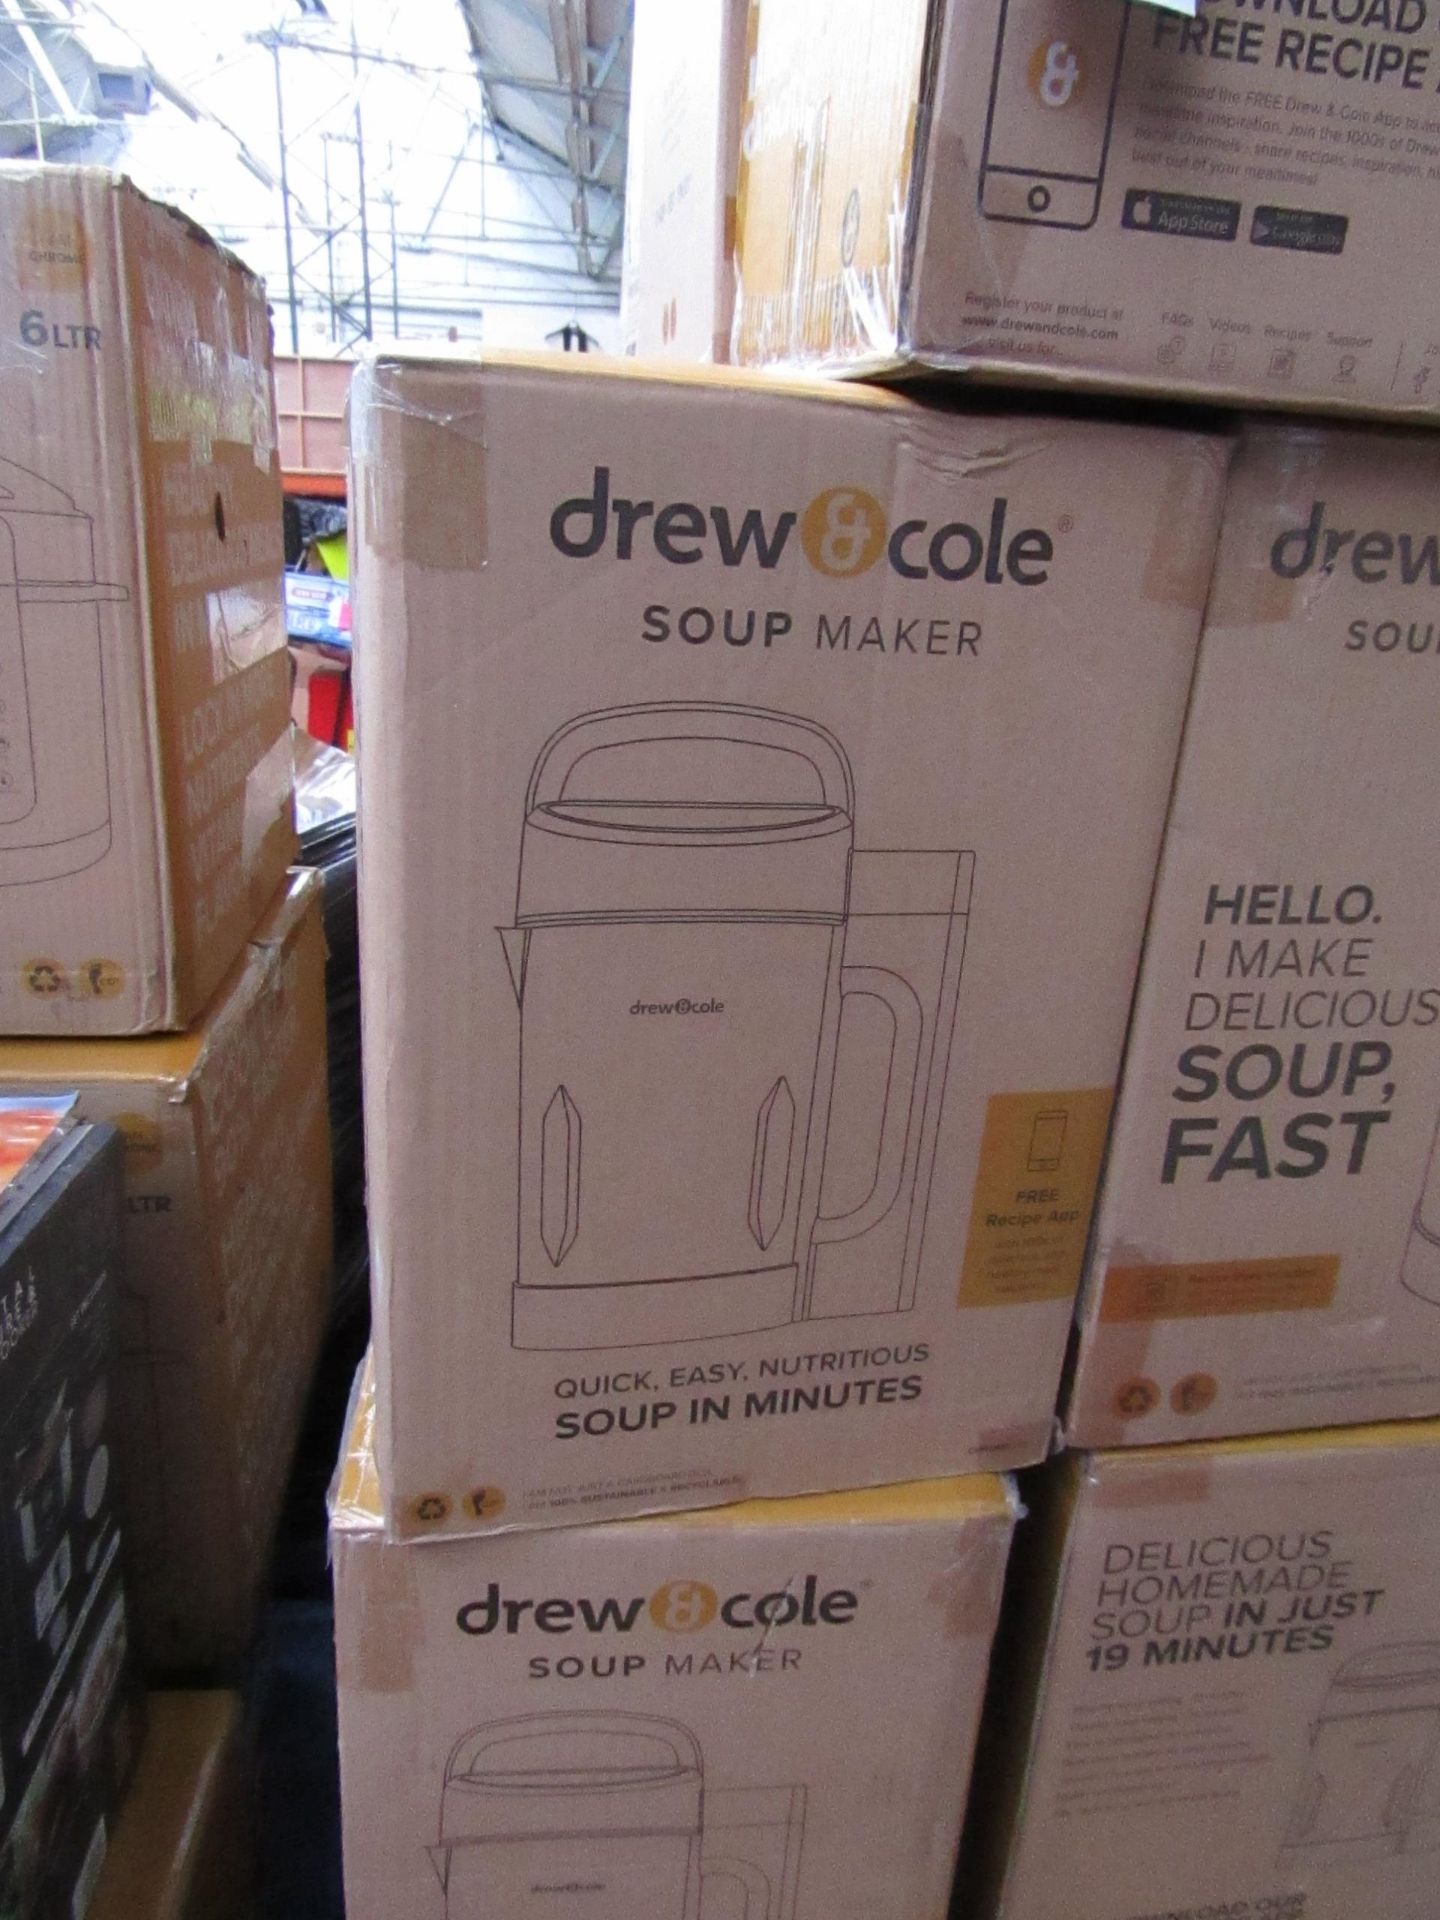 | 7X | DREW AND COLE SOUP CHEF | BOXED AND UNCHECKED | NO ONLINE RESALE | SKU C5060541516809 |